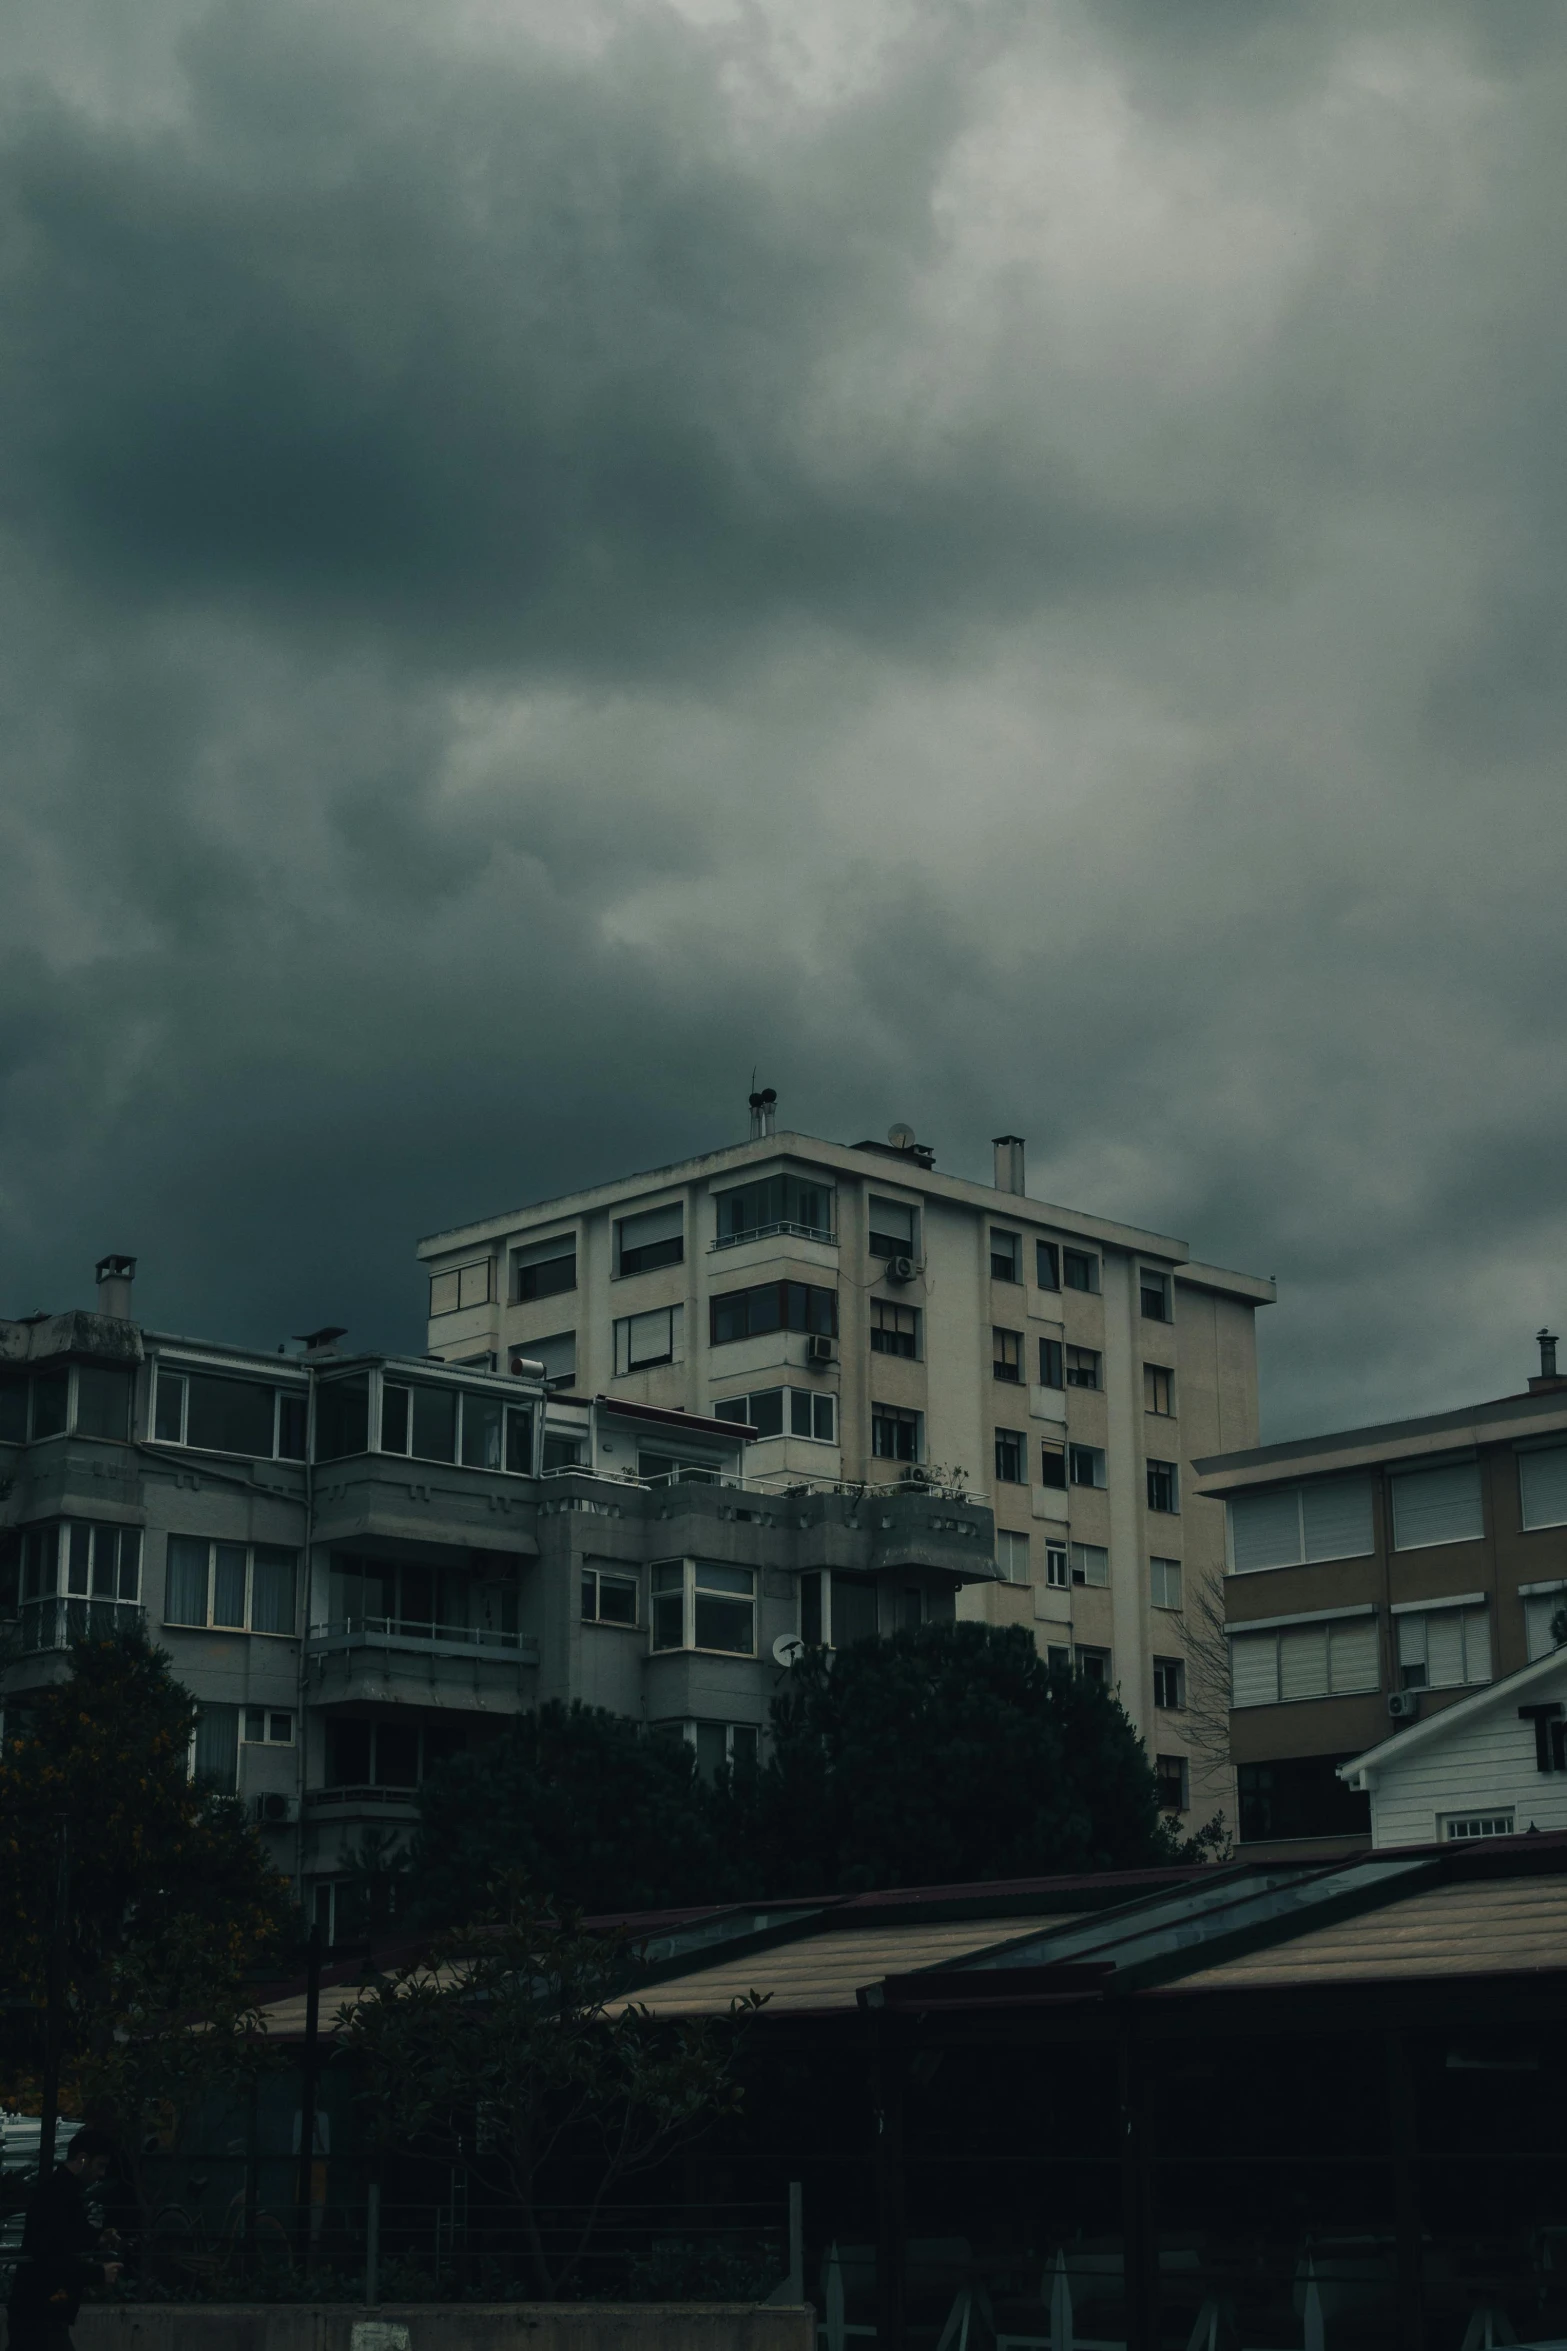 storm clouds loom over two apartment buildings